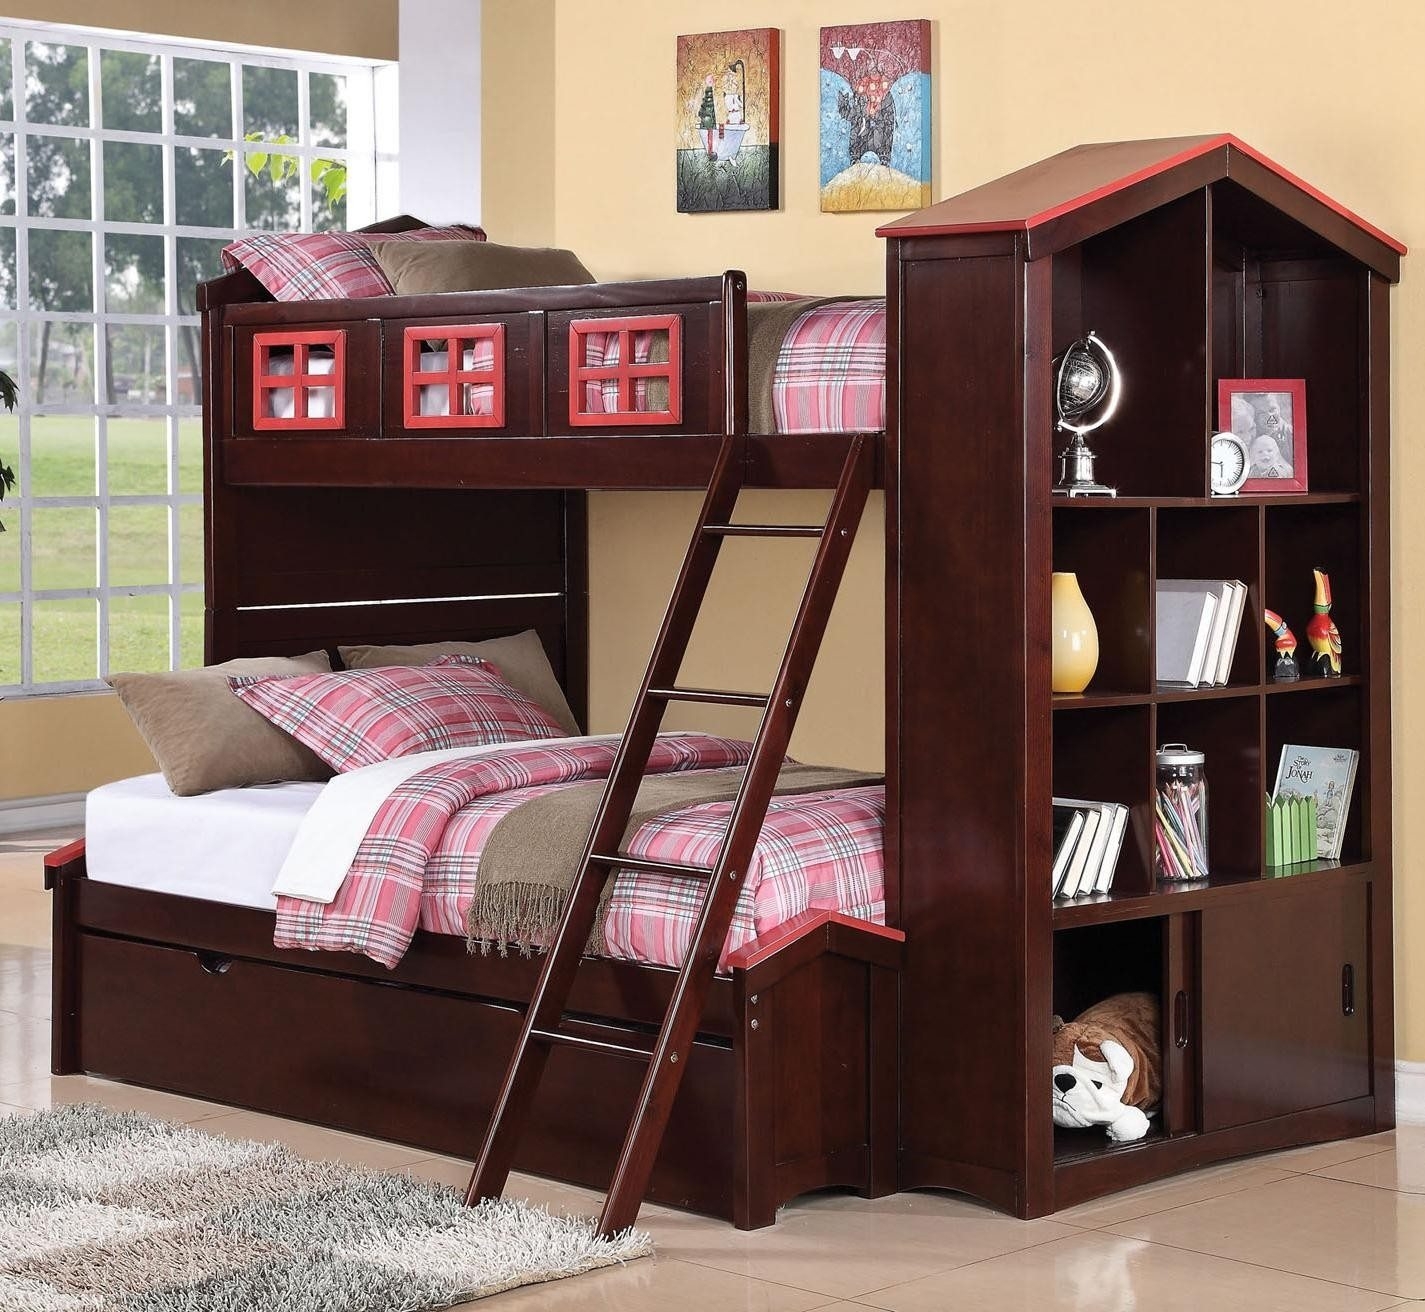 Trundle bed with bookcase headboard 16